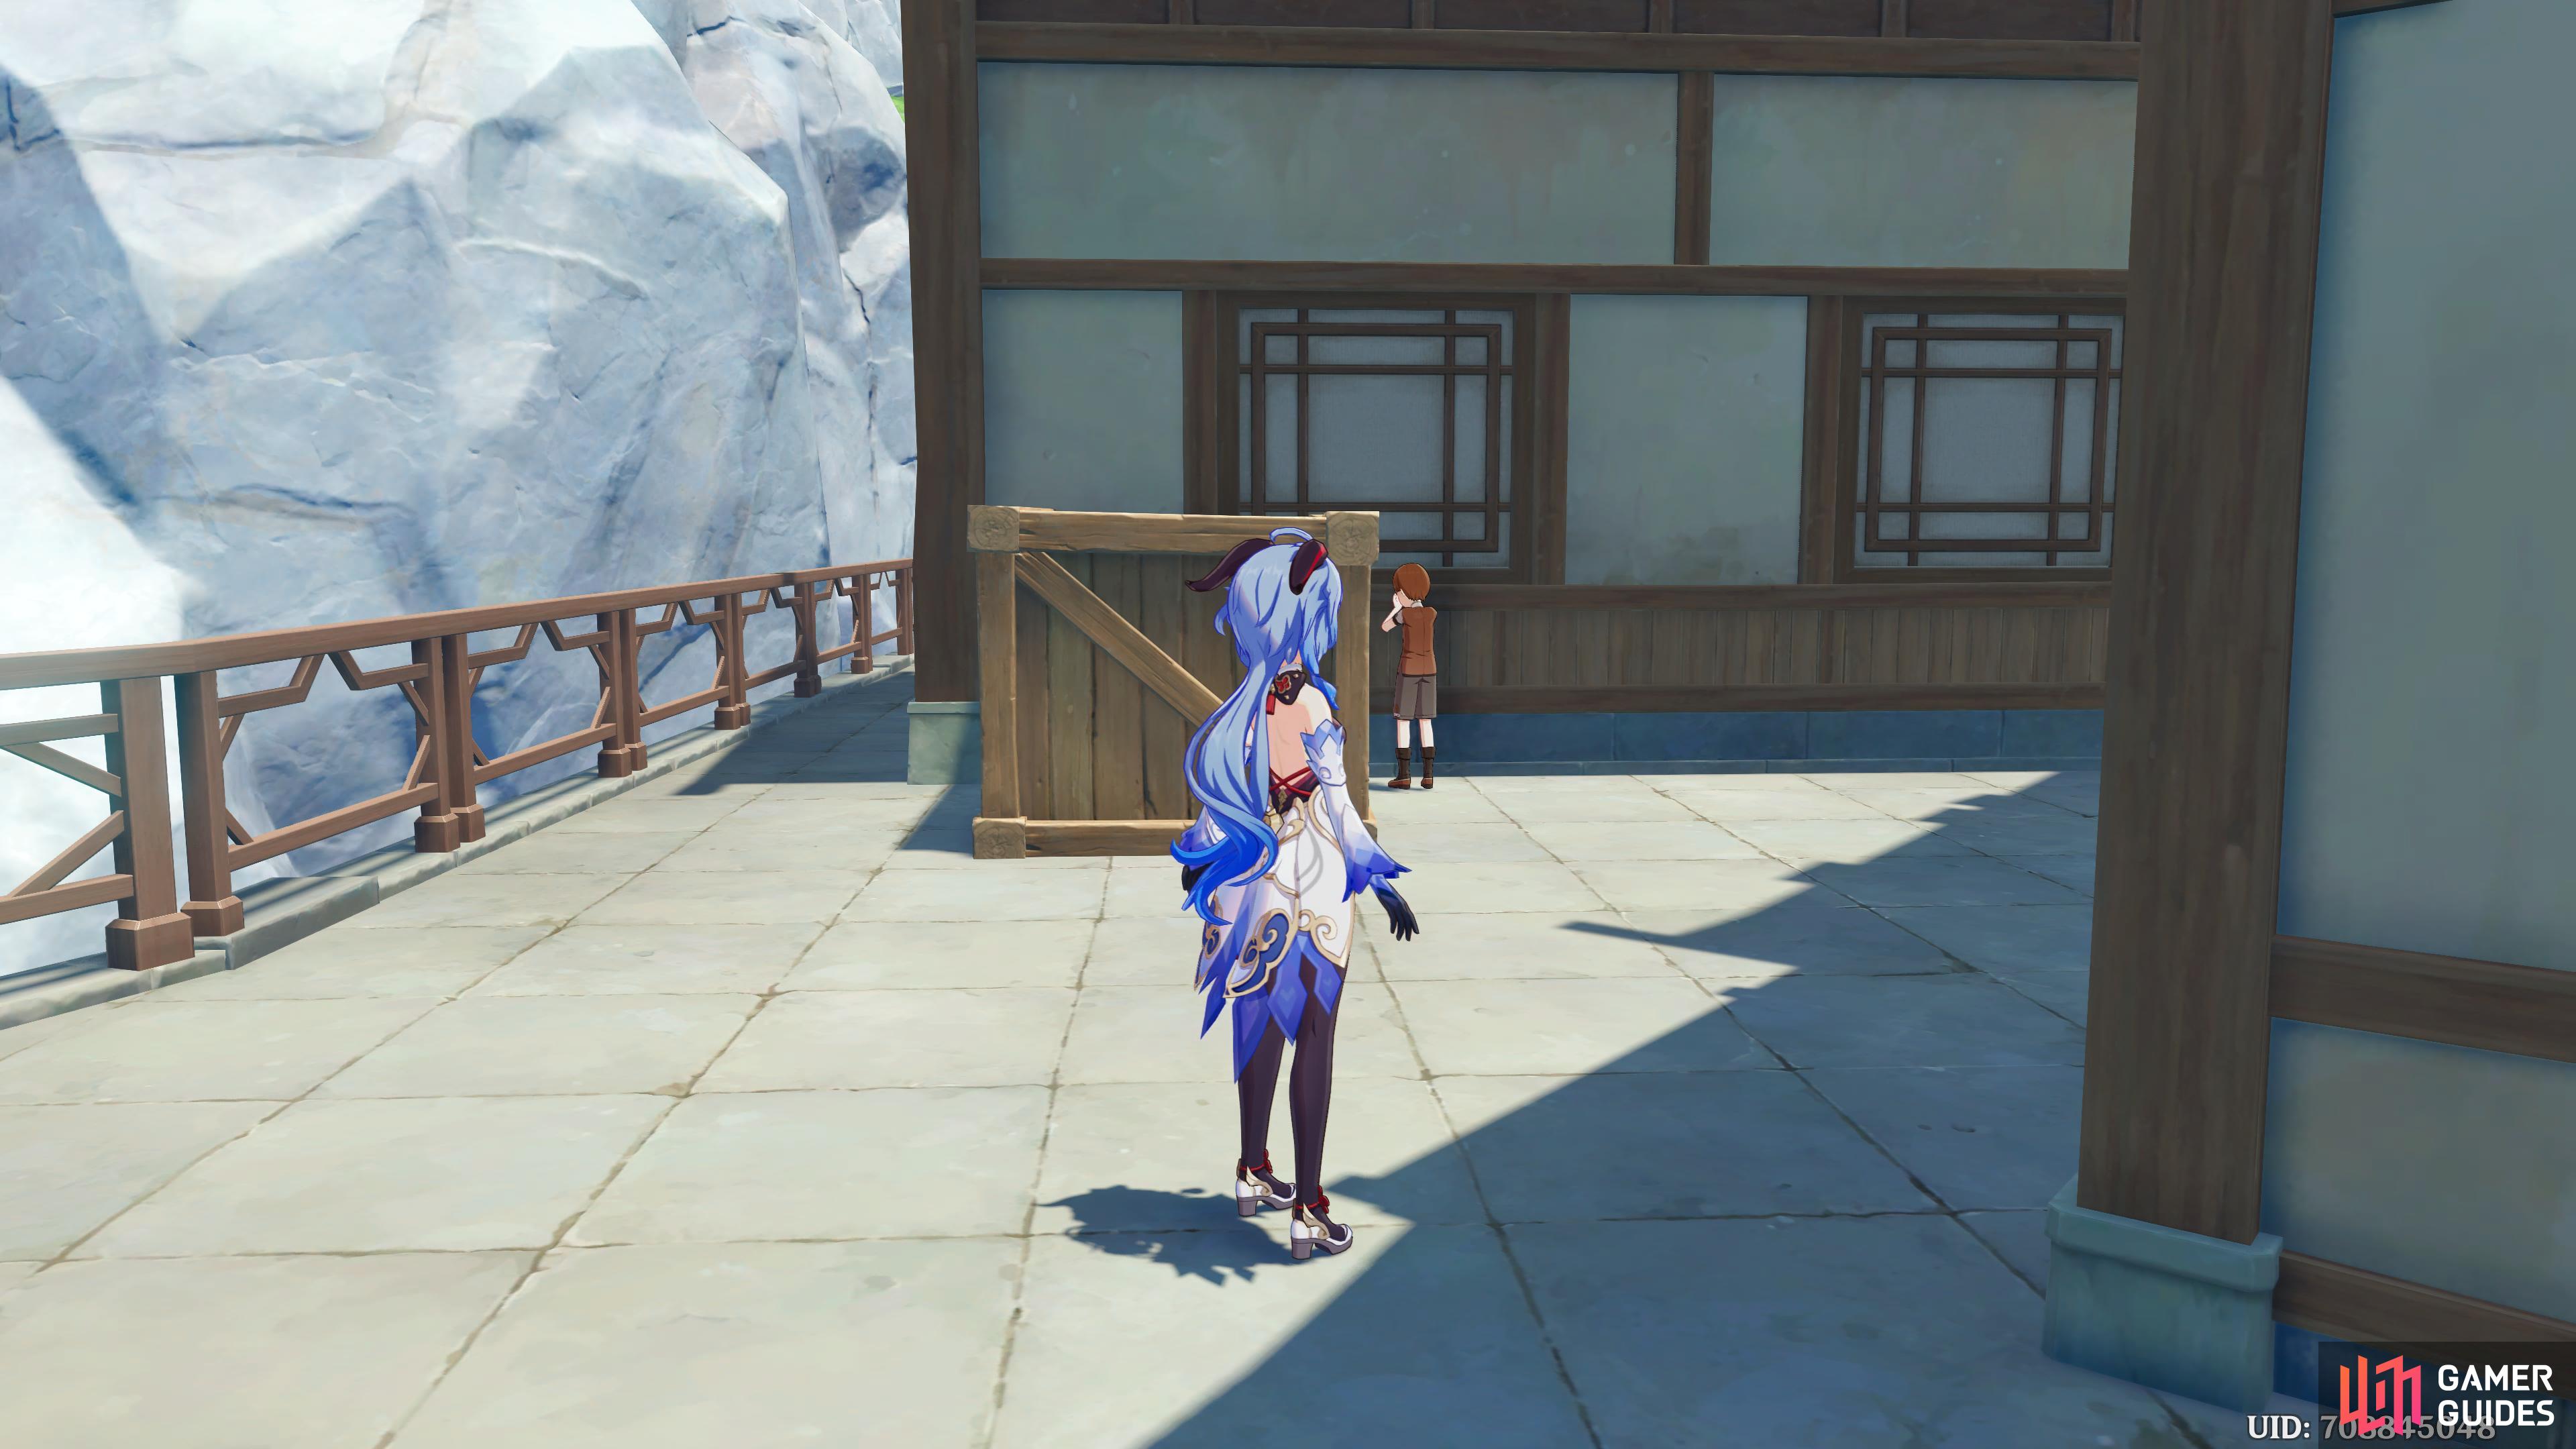 Dalong is hiding behind the Second Life store, to your east